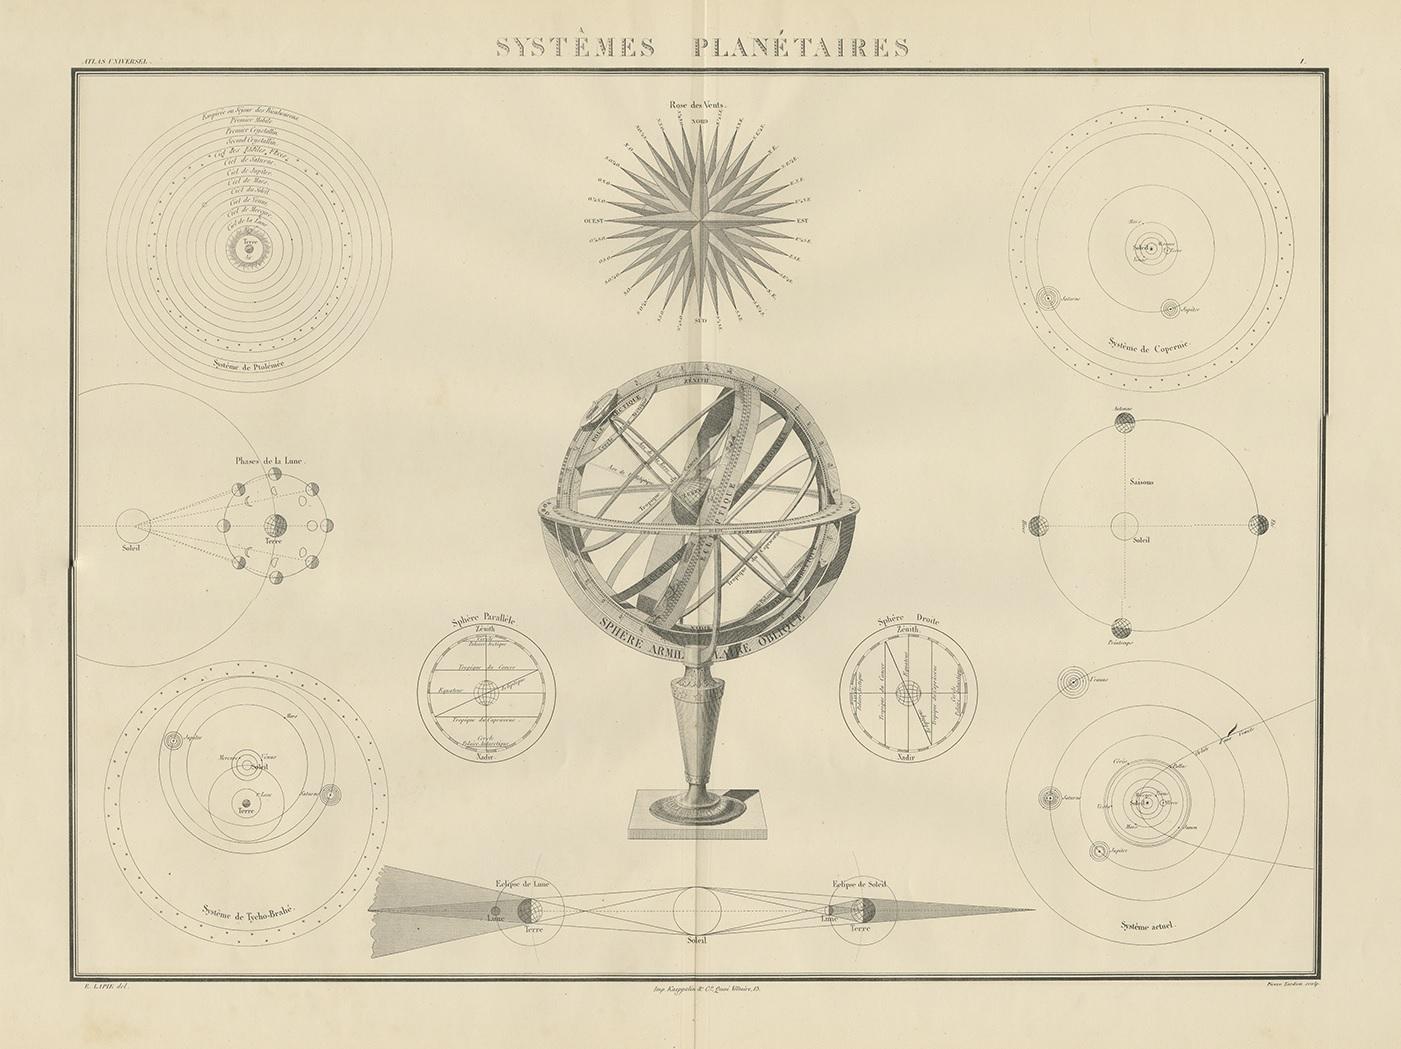 Antique print titled 'Systèmes Planétaires'. Chart of various celestial and scientific models. Includes an armillary sphere and various models of the universe, the season, eclipses, a Copernican, Tycho-Brahe and Ptolomaic model of the solar system